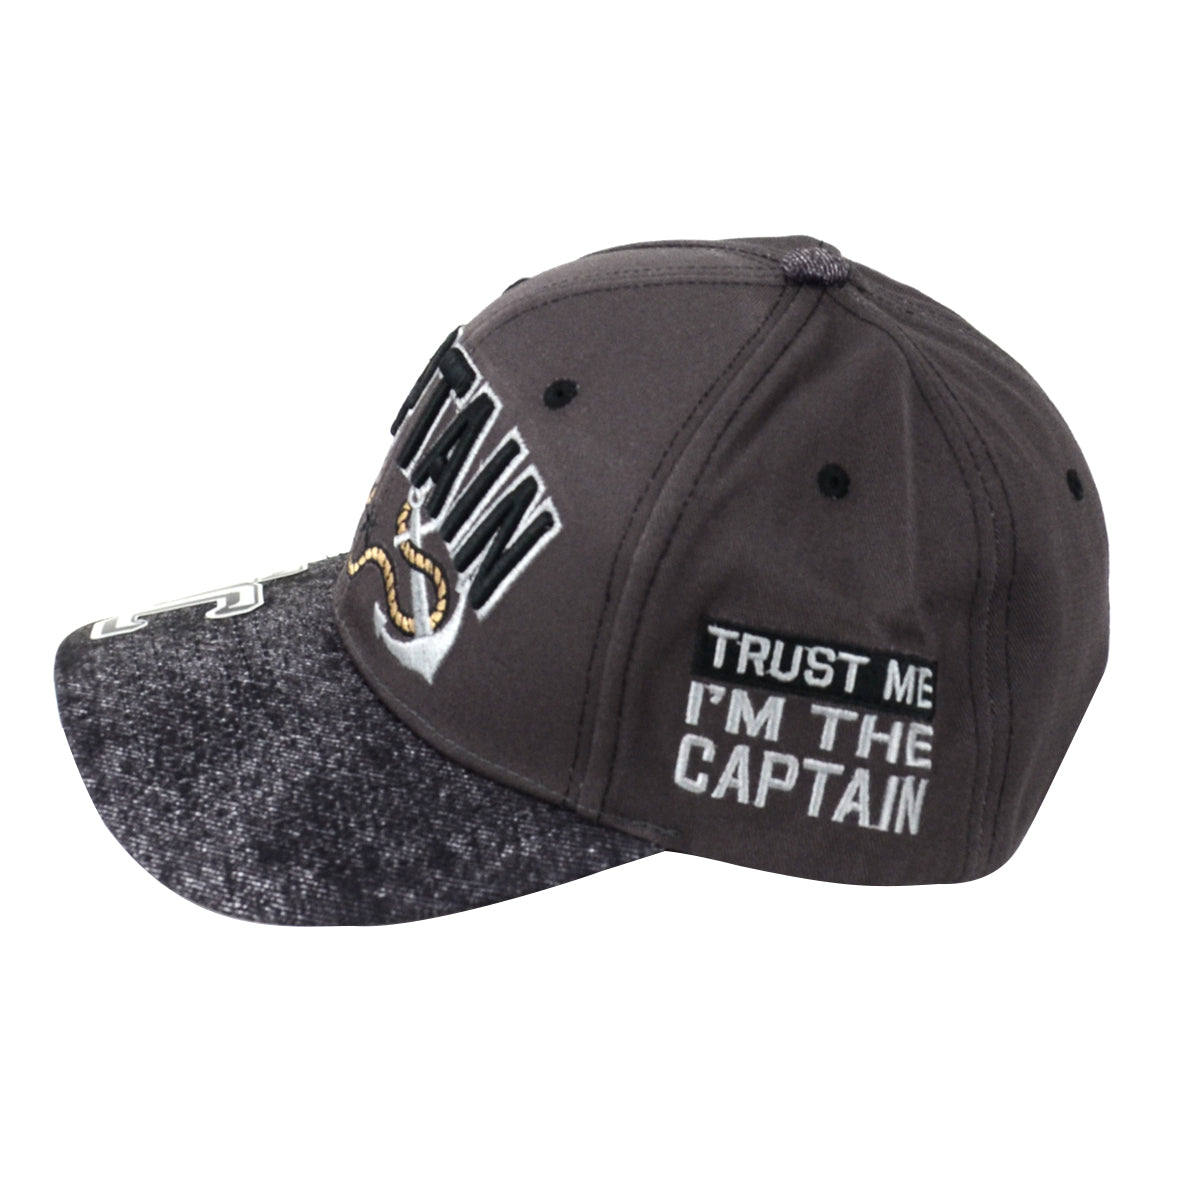 Snapback "Captain" Hat Embroidered